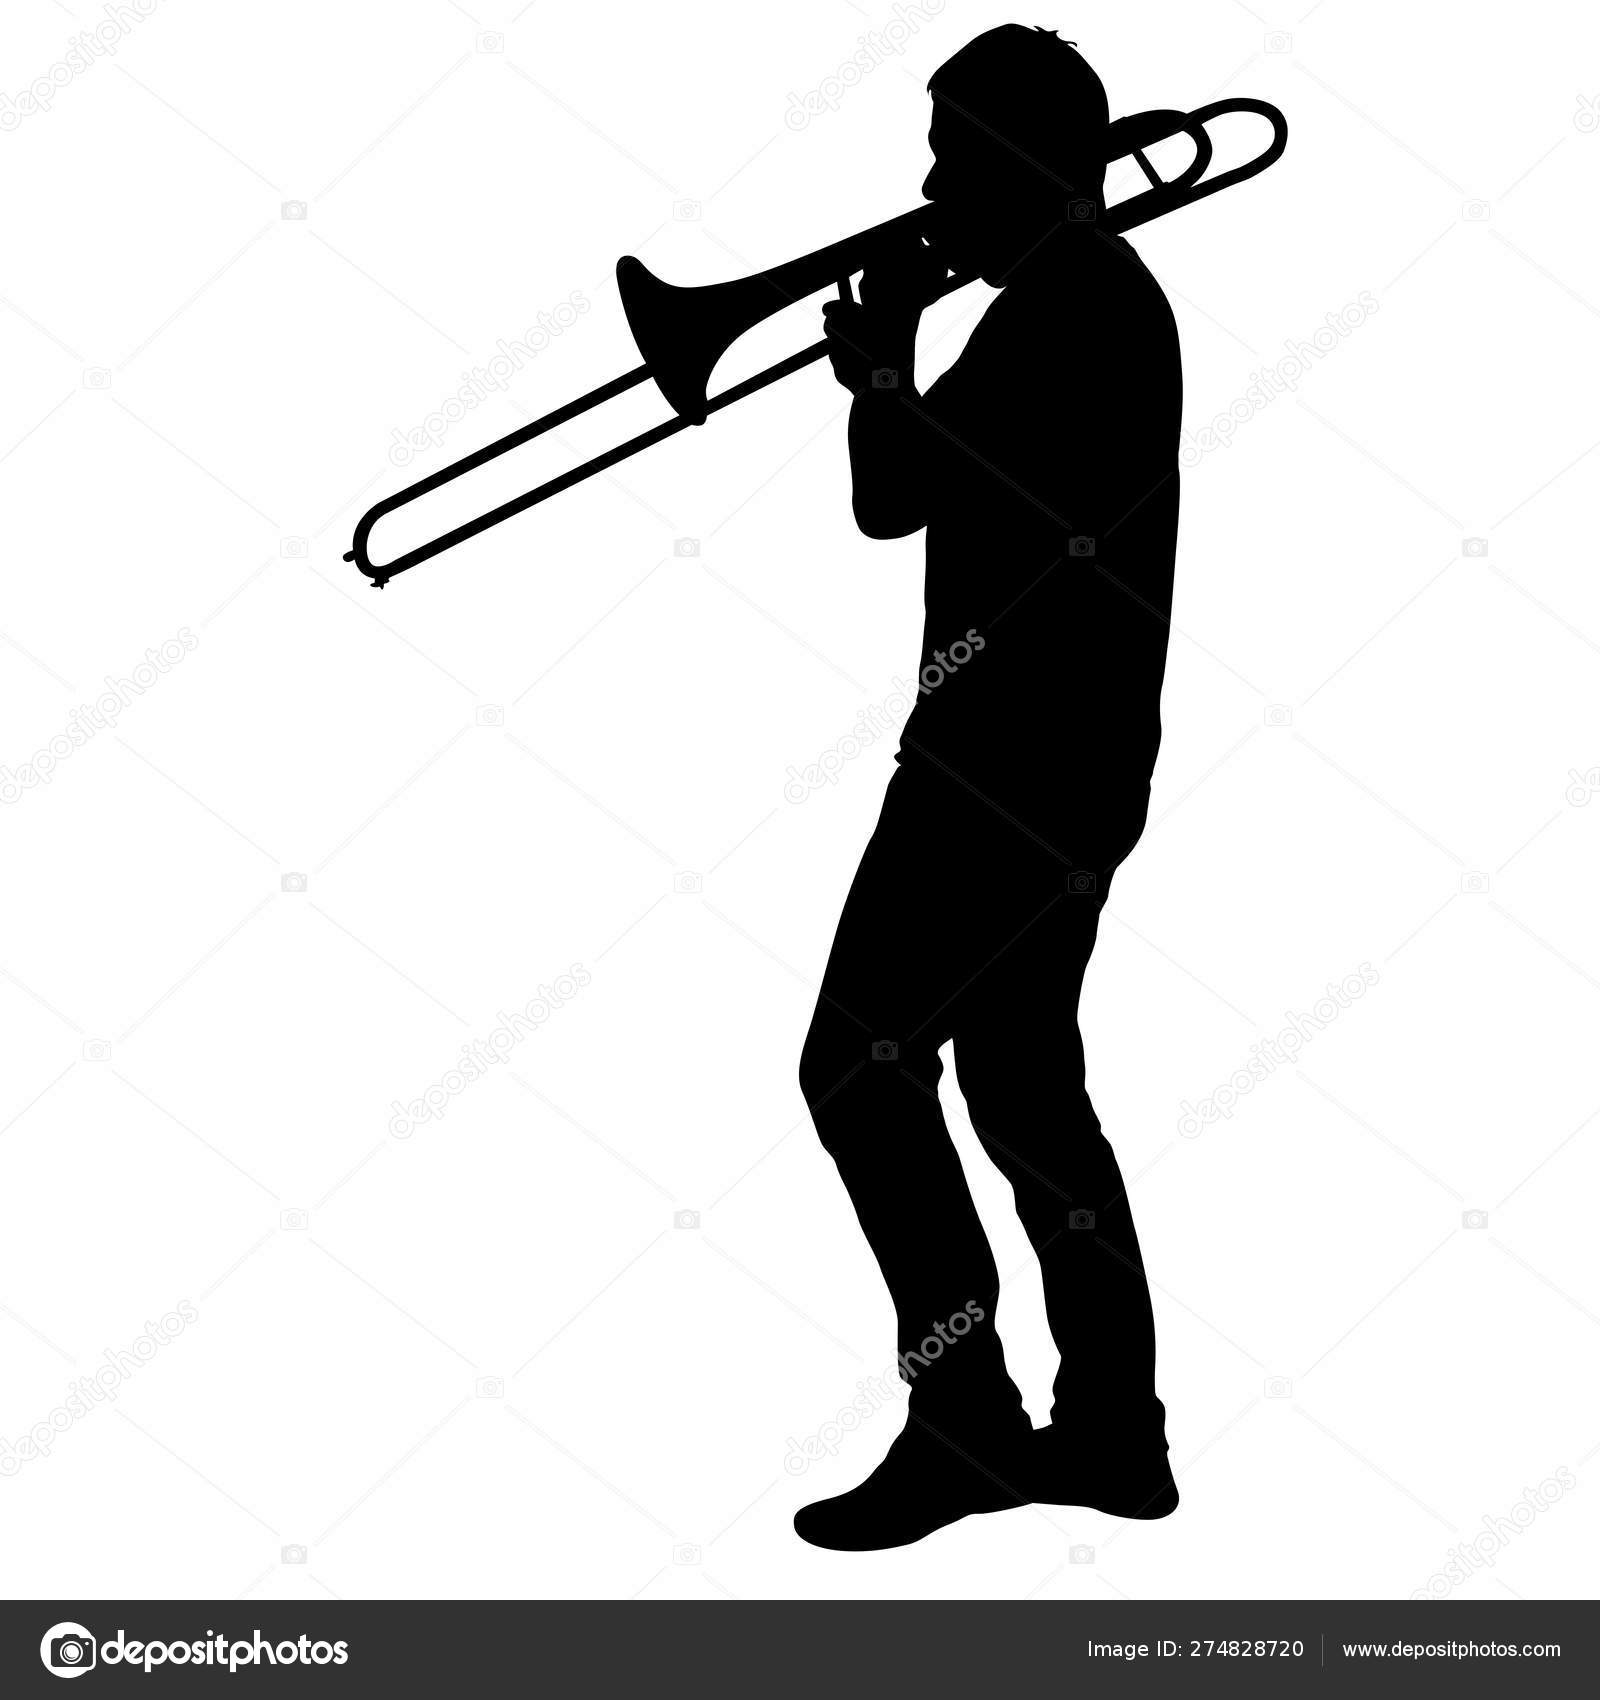 Silhouette Of Musician Playing The Trombone On A White Background Vector Image By C rrows Vector Stock